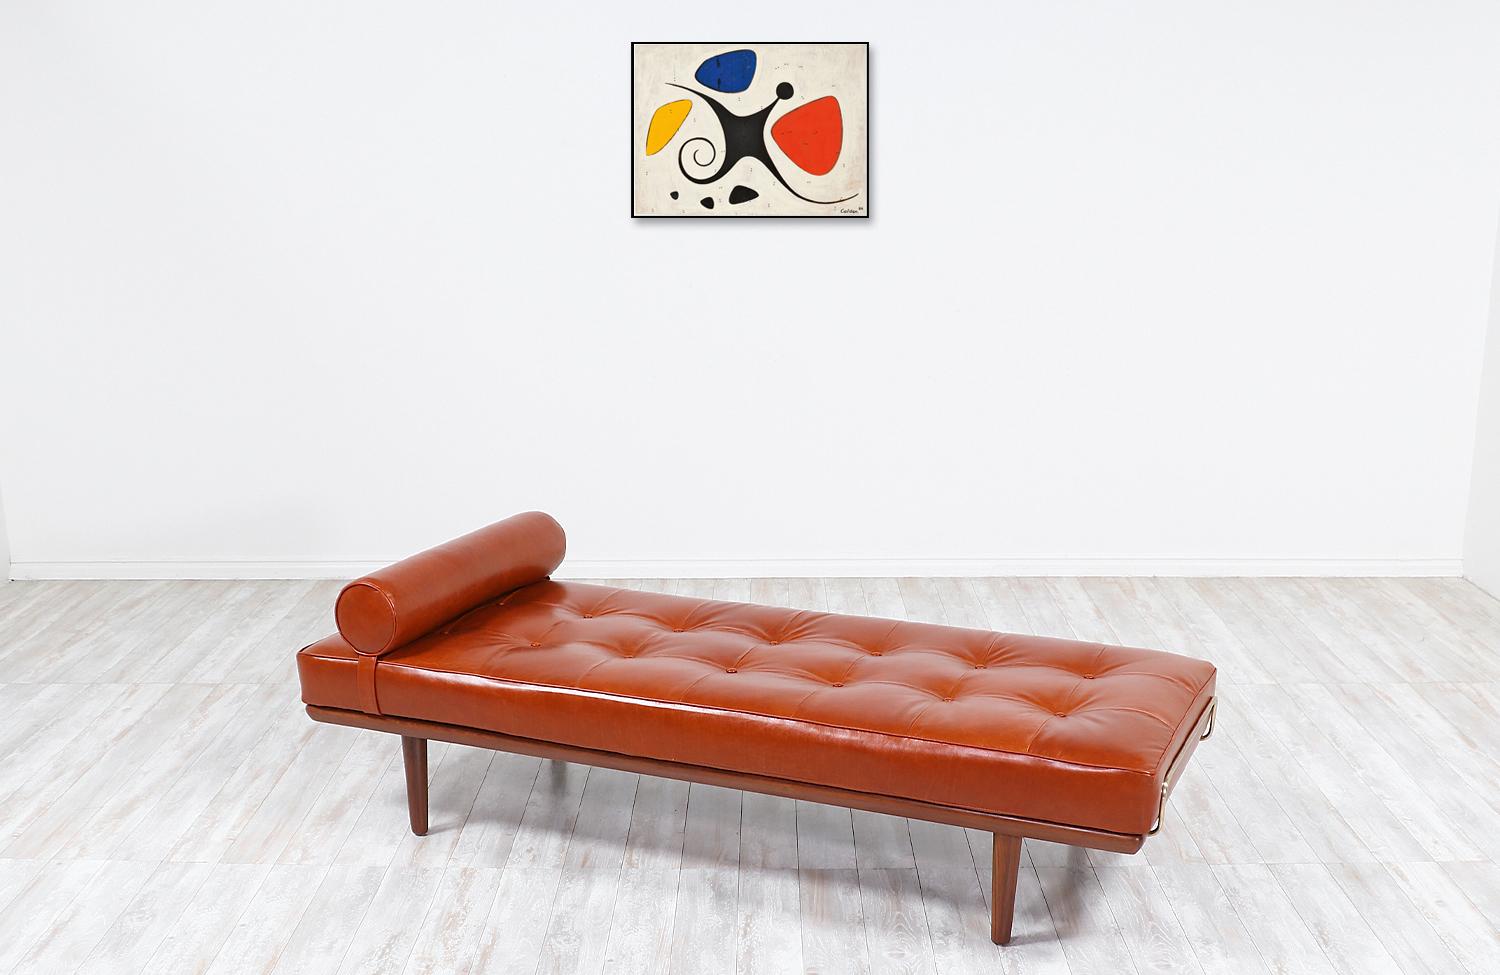 One of the most luxurious and comfortable daybeds from Denmark is this iconic model GE19 designed by architect Hans J. Wegner in collaboration with the famous workshop of GETAMA in 1956. It features an expertly crafted Italian cognac leather